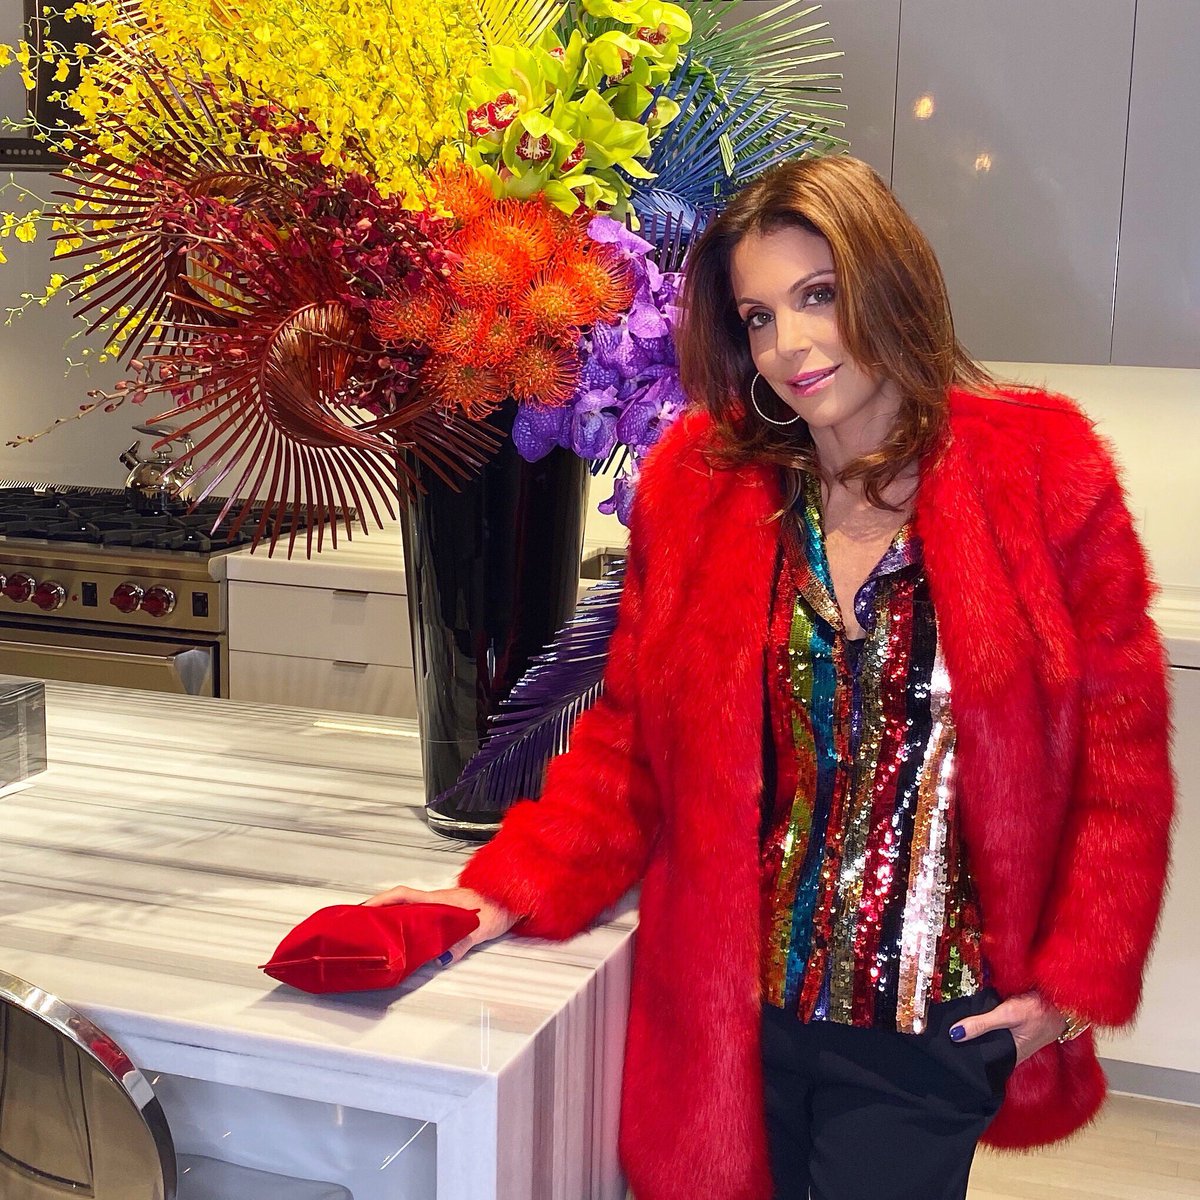 Thank you for all the birthday wishes! Beyond grateful to celebrate with my family and friends... and YOU.💞🎉🎈🥂❤️💋🌈❌⭕️

#HappyBirthday #Birthday #BirthdayParty #Family #Love #APlaceOfYes #Happiness #ColorfulBirthday